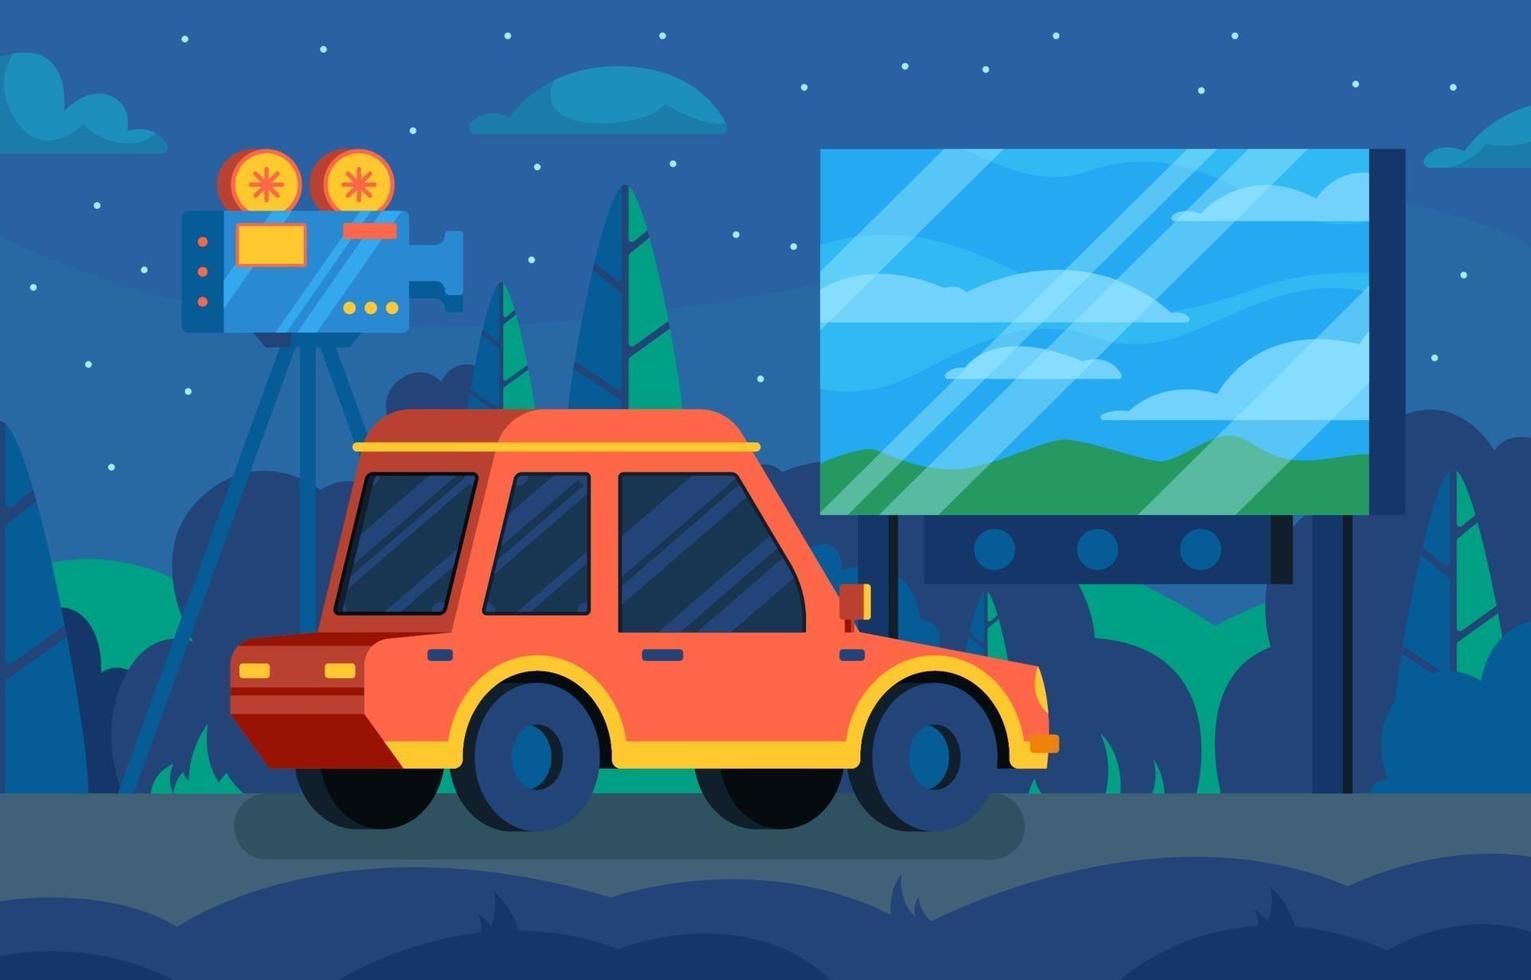 Flat Design Drive-in Movie Theater Concept vector